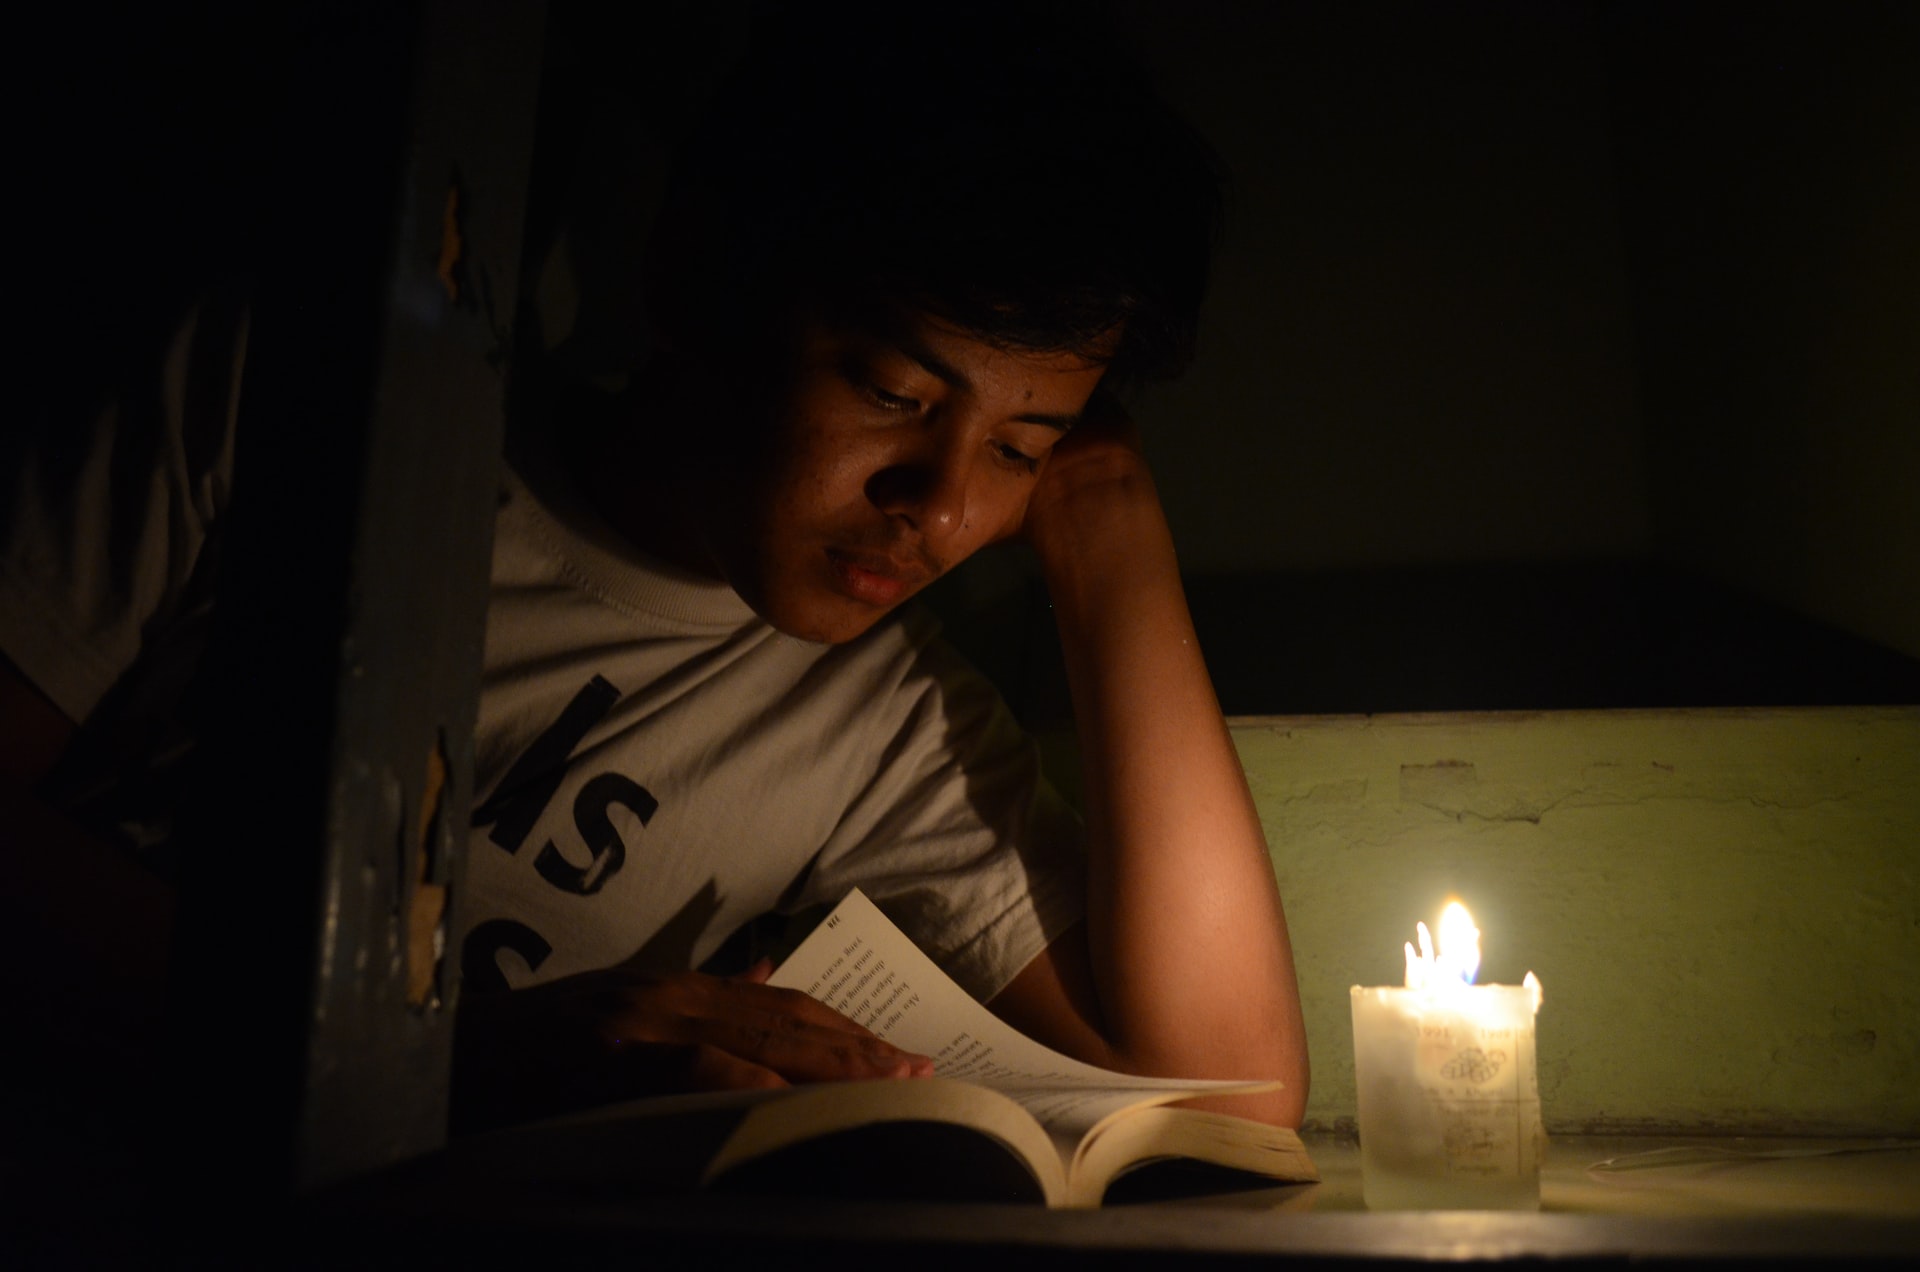 A young Asian-looking man with head resting on an arm reads a book in front of a burning wide white candle